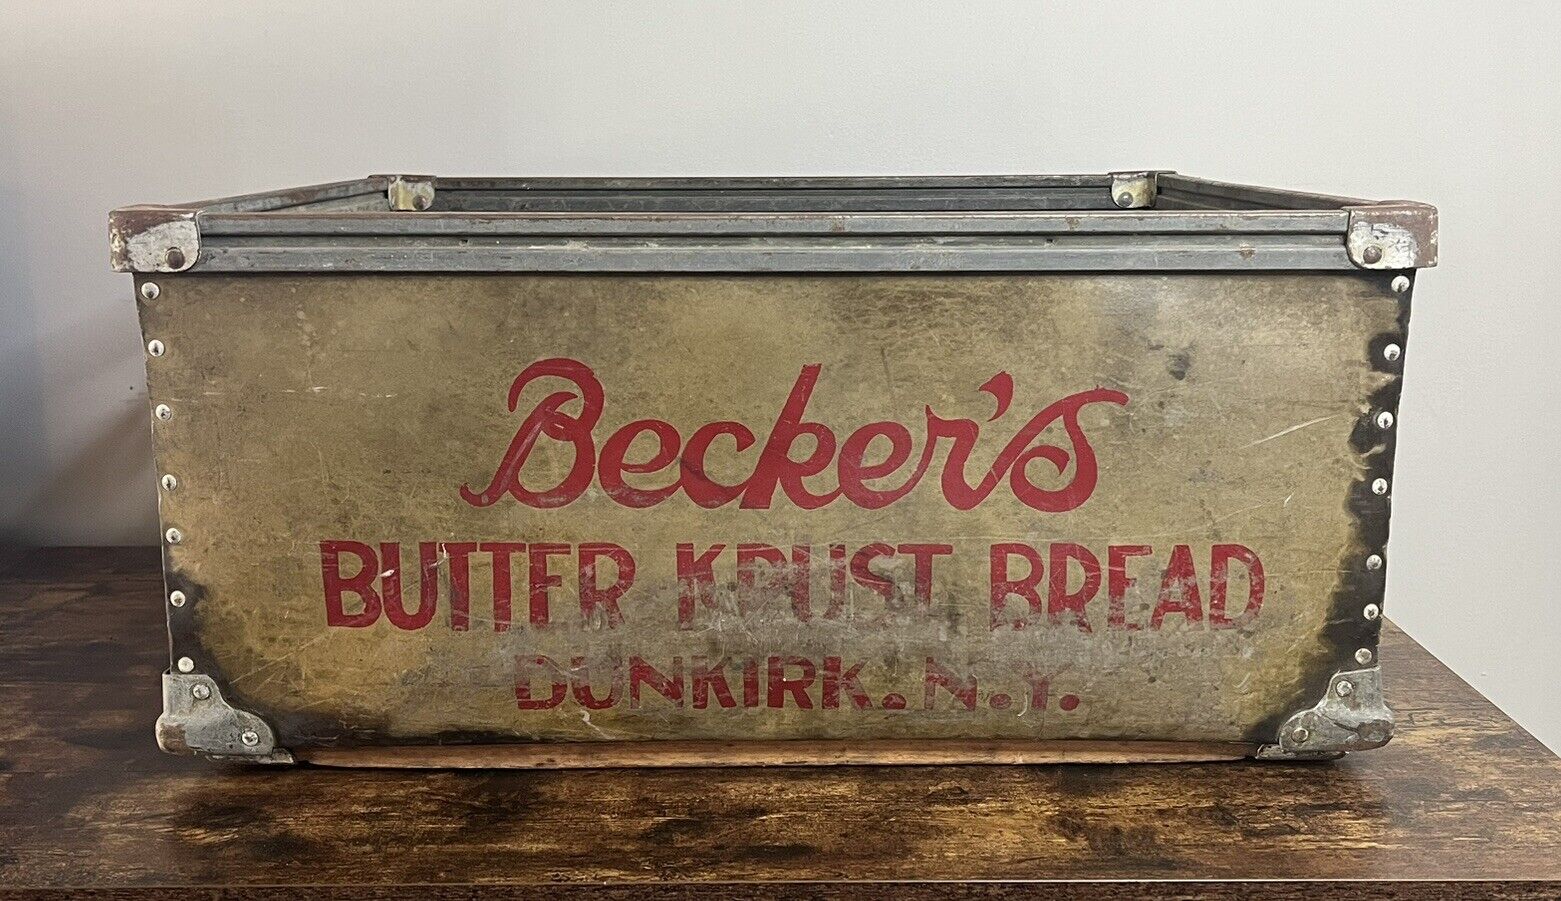 Beckers Butter Krust Bread Dunkirk NY Bakery Store Delivery Box Kennett Fibre Co